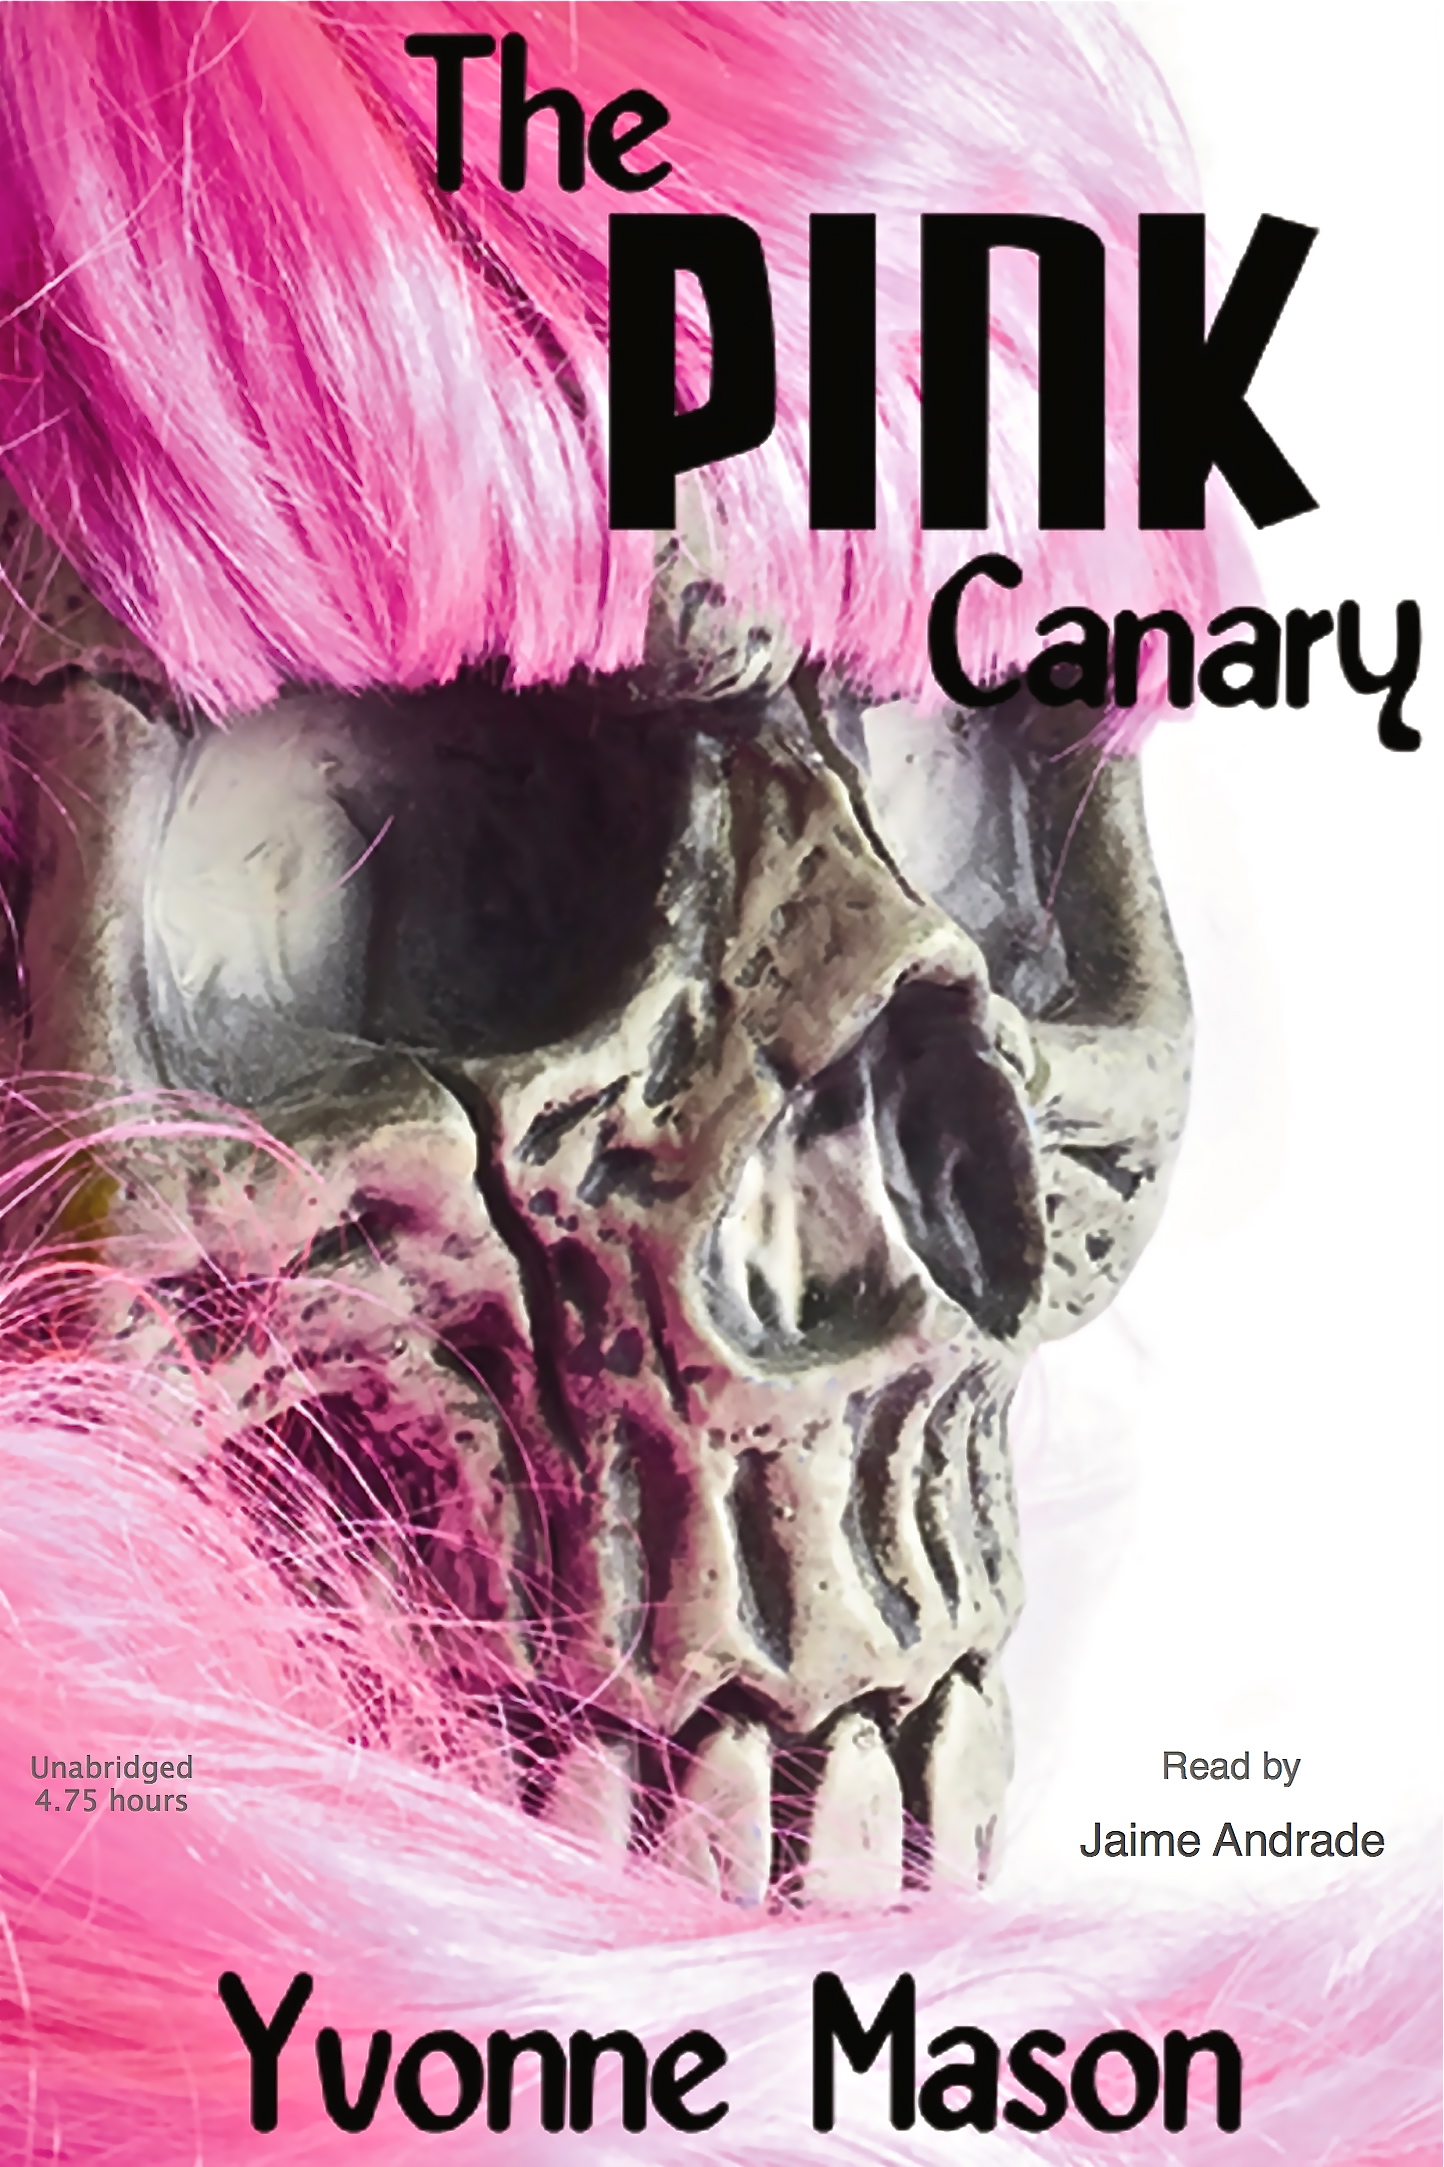 The Pink Canary by Yvonne Mason